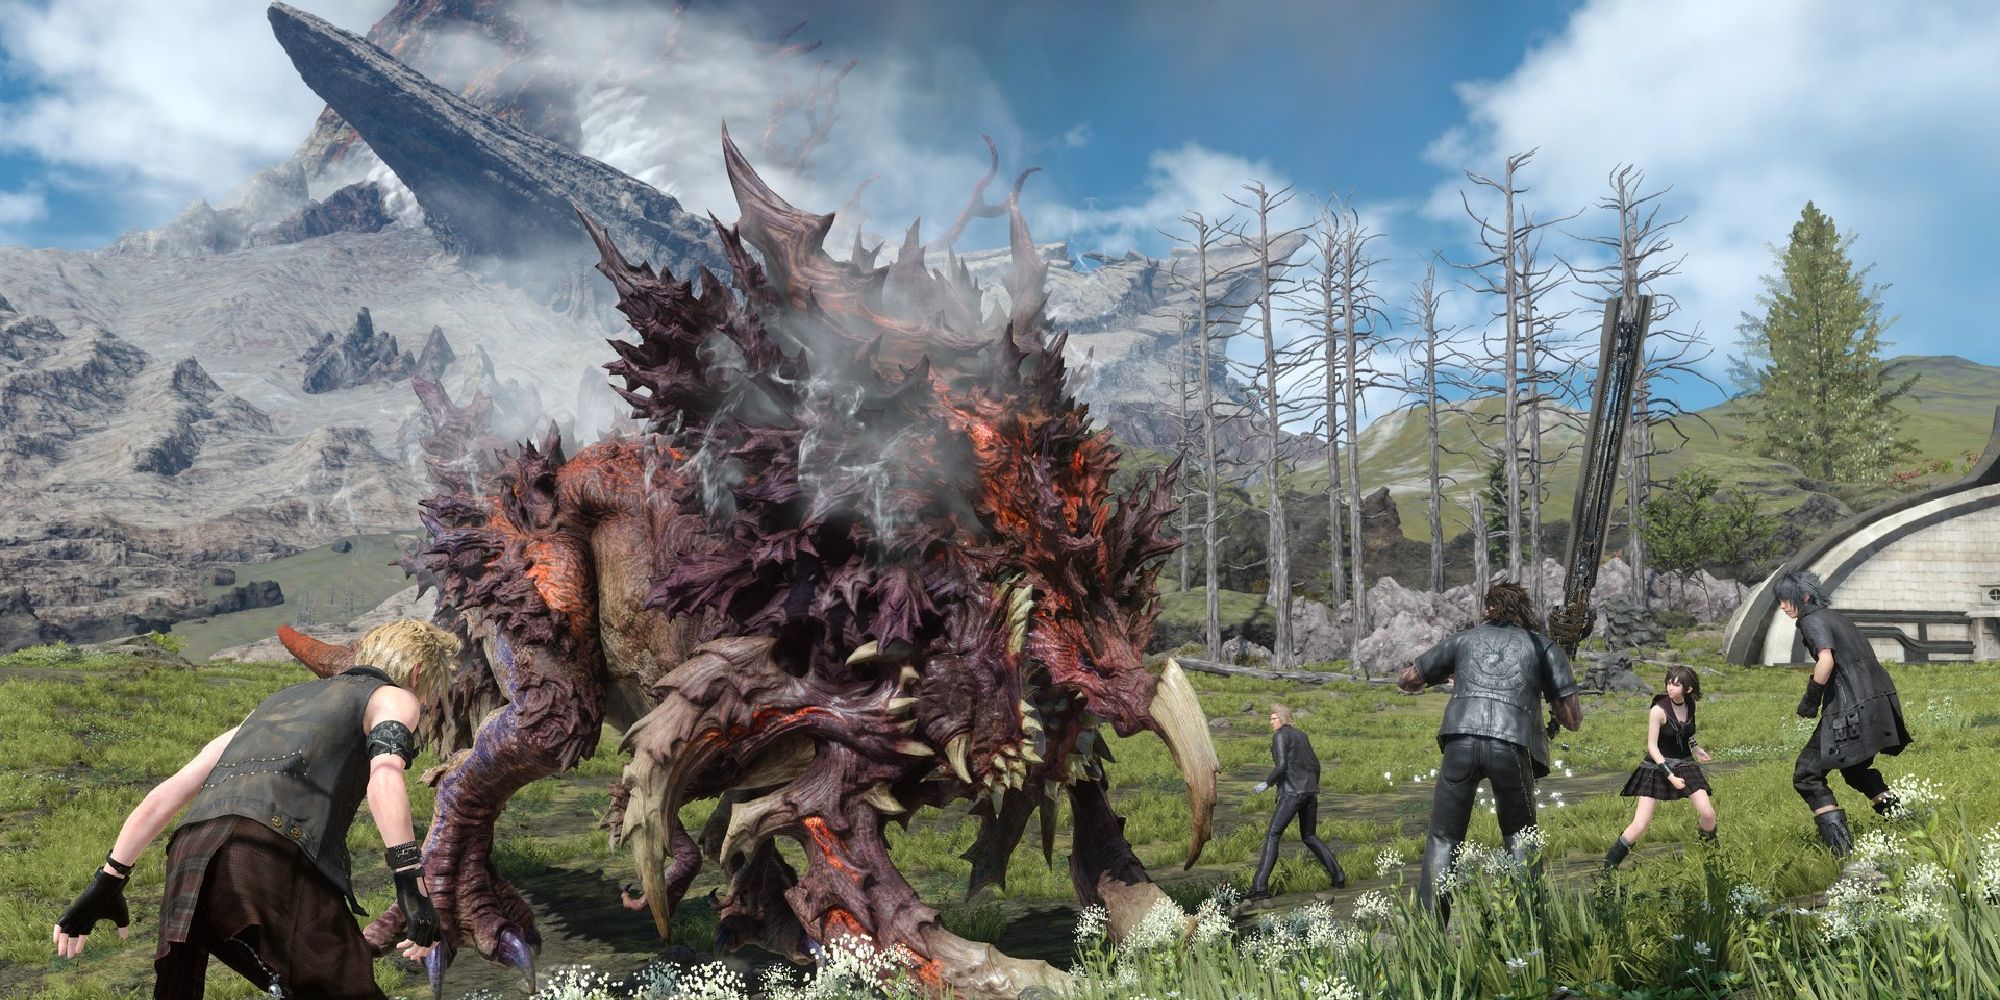 ffxv characters surrounding a creature